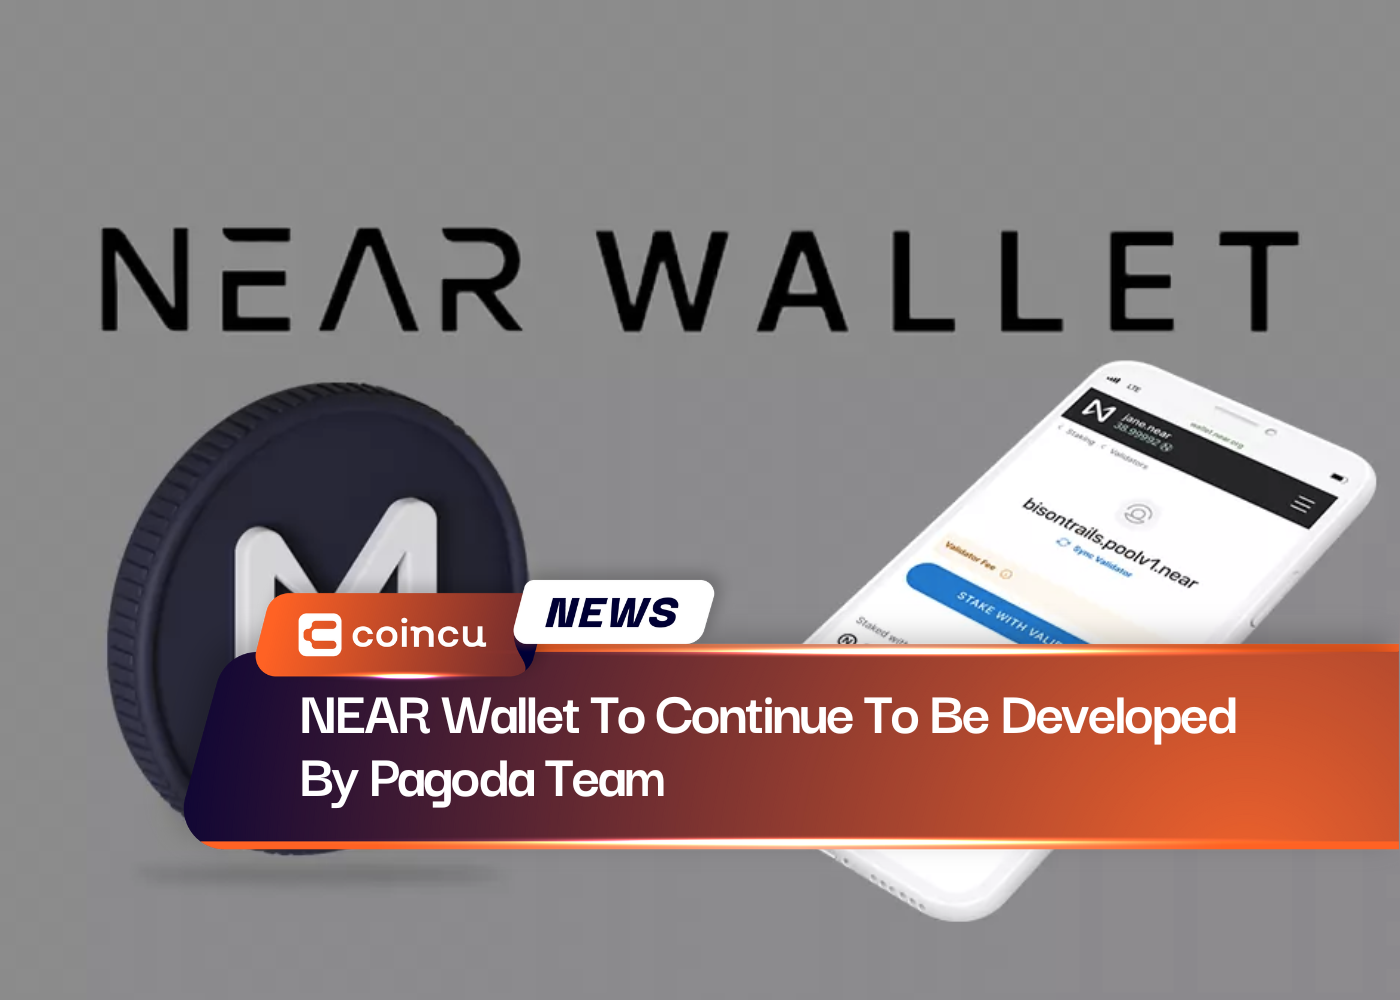 NEAR Wallet To Continue To Be Developed By Pagoda Team